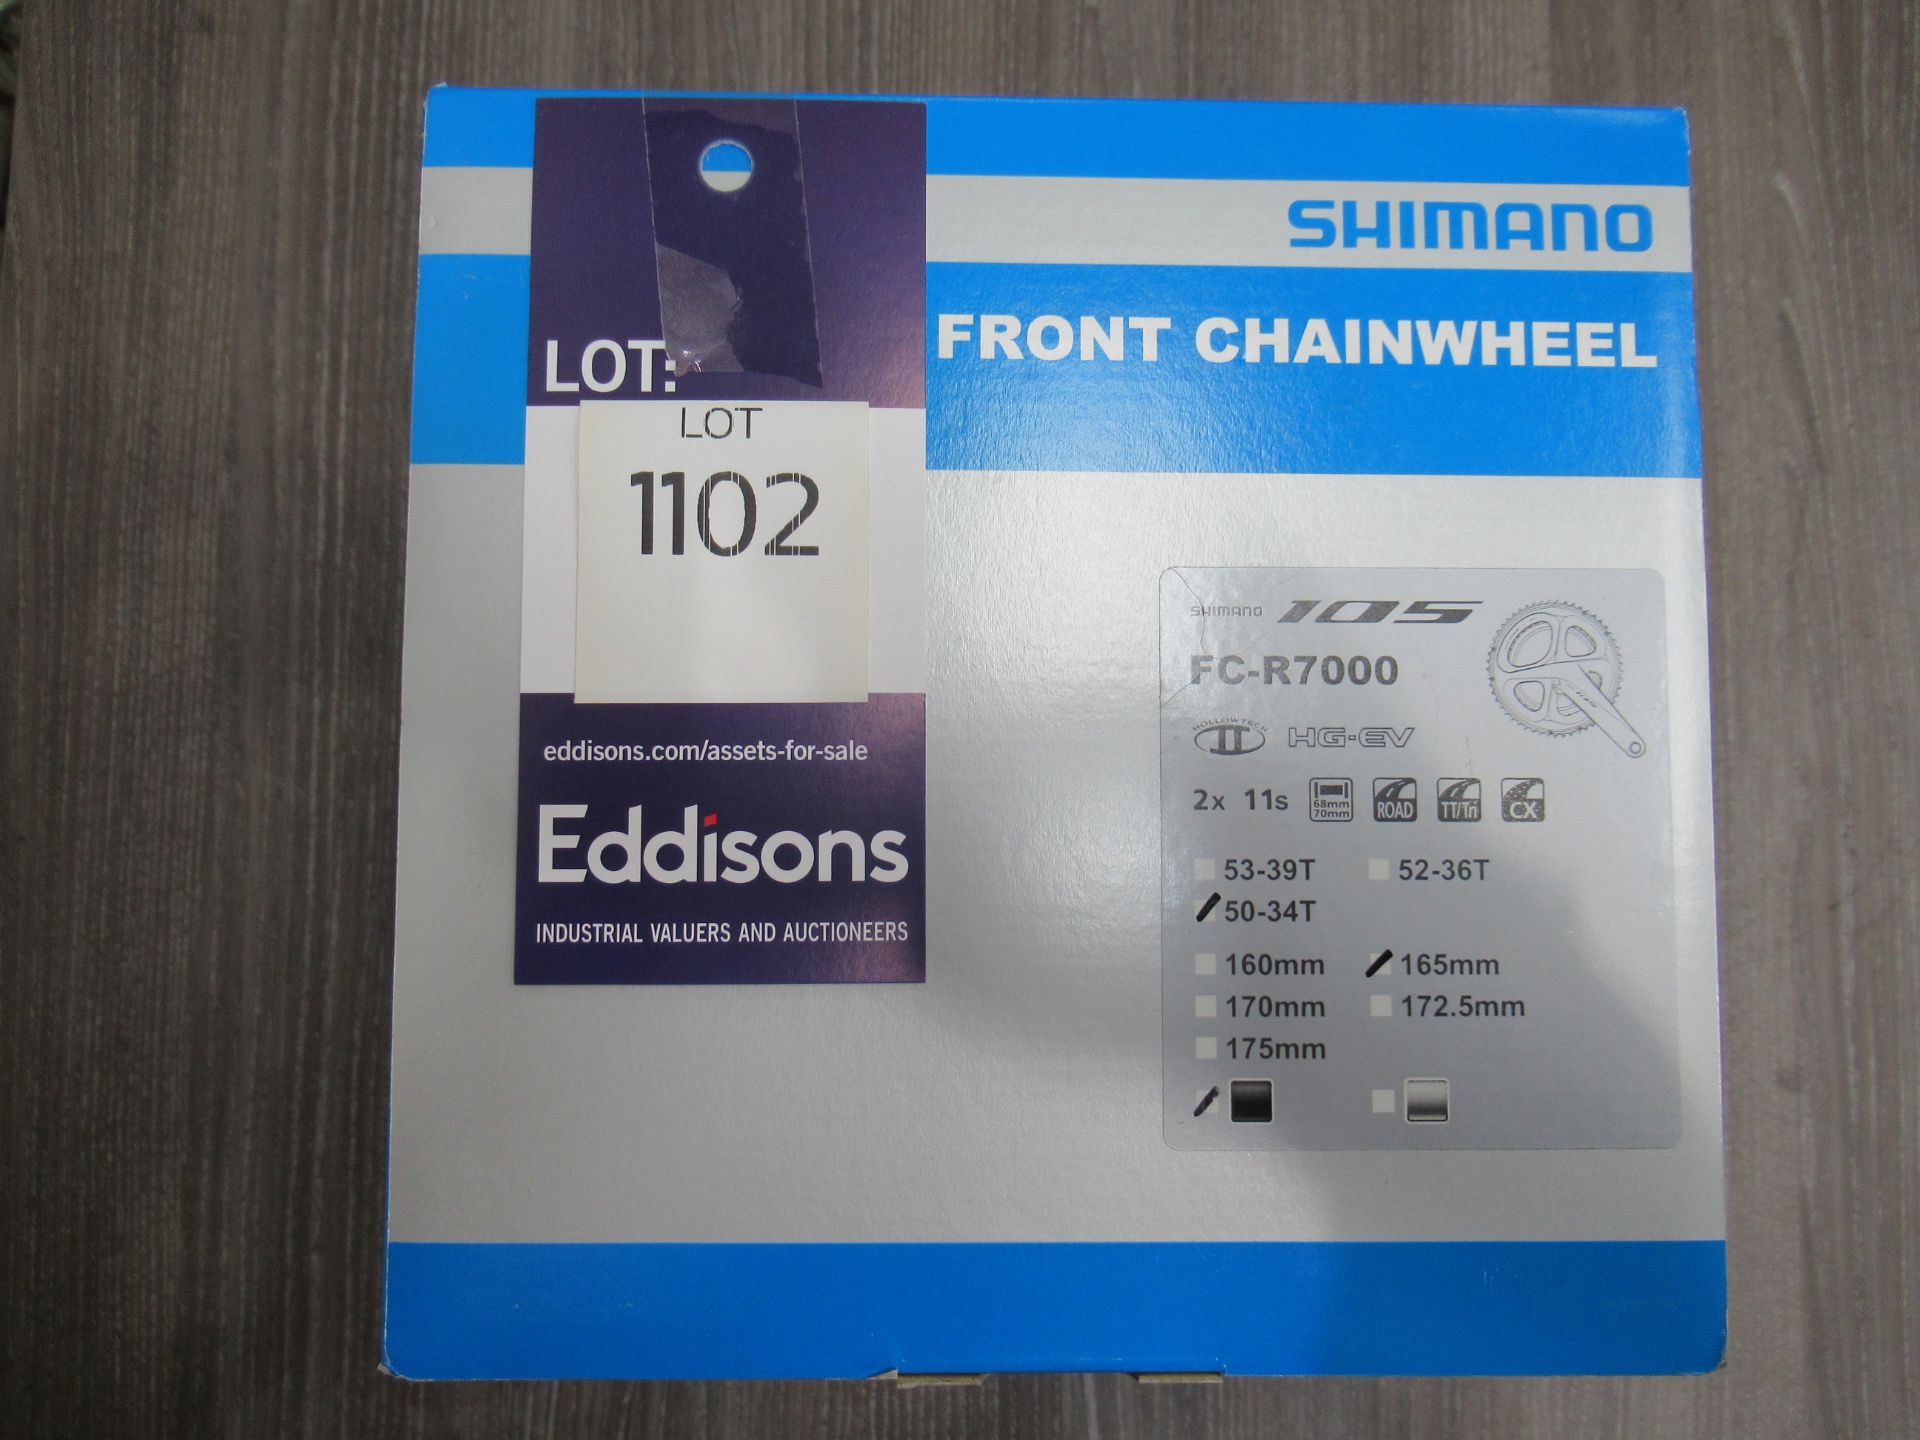 Shimano FC-R7000 11-SPD front chain wheel 50-34T 165mm (RRP 259.99)